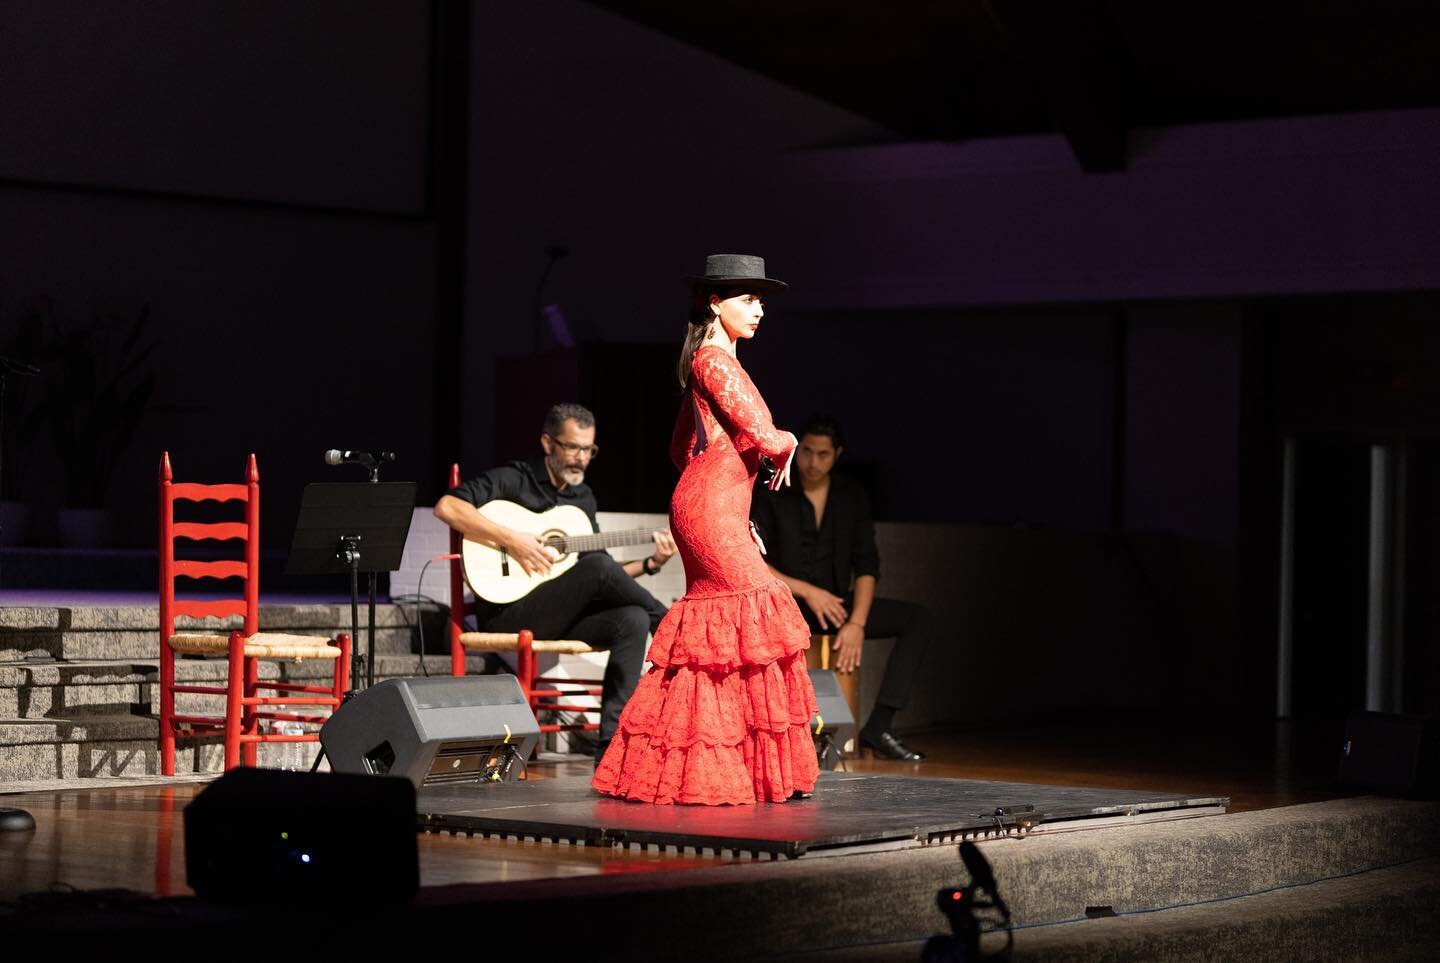 Just a week ago we were working on those final details for our flamenco show &ldquo;A Spanish Night to Remember&rdquo; for @redmthemovement &hellip; cannot believe this happened so fast❗️❗️❗️ people are looking forward to more Spanish Nights to remem